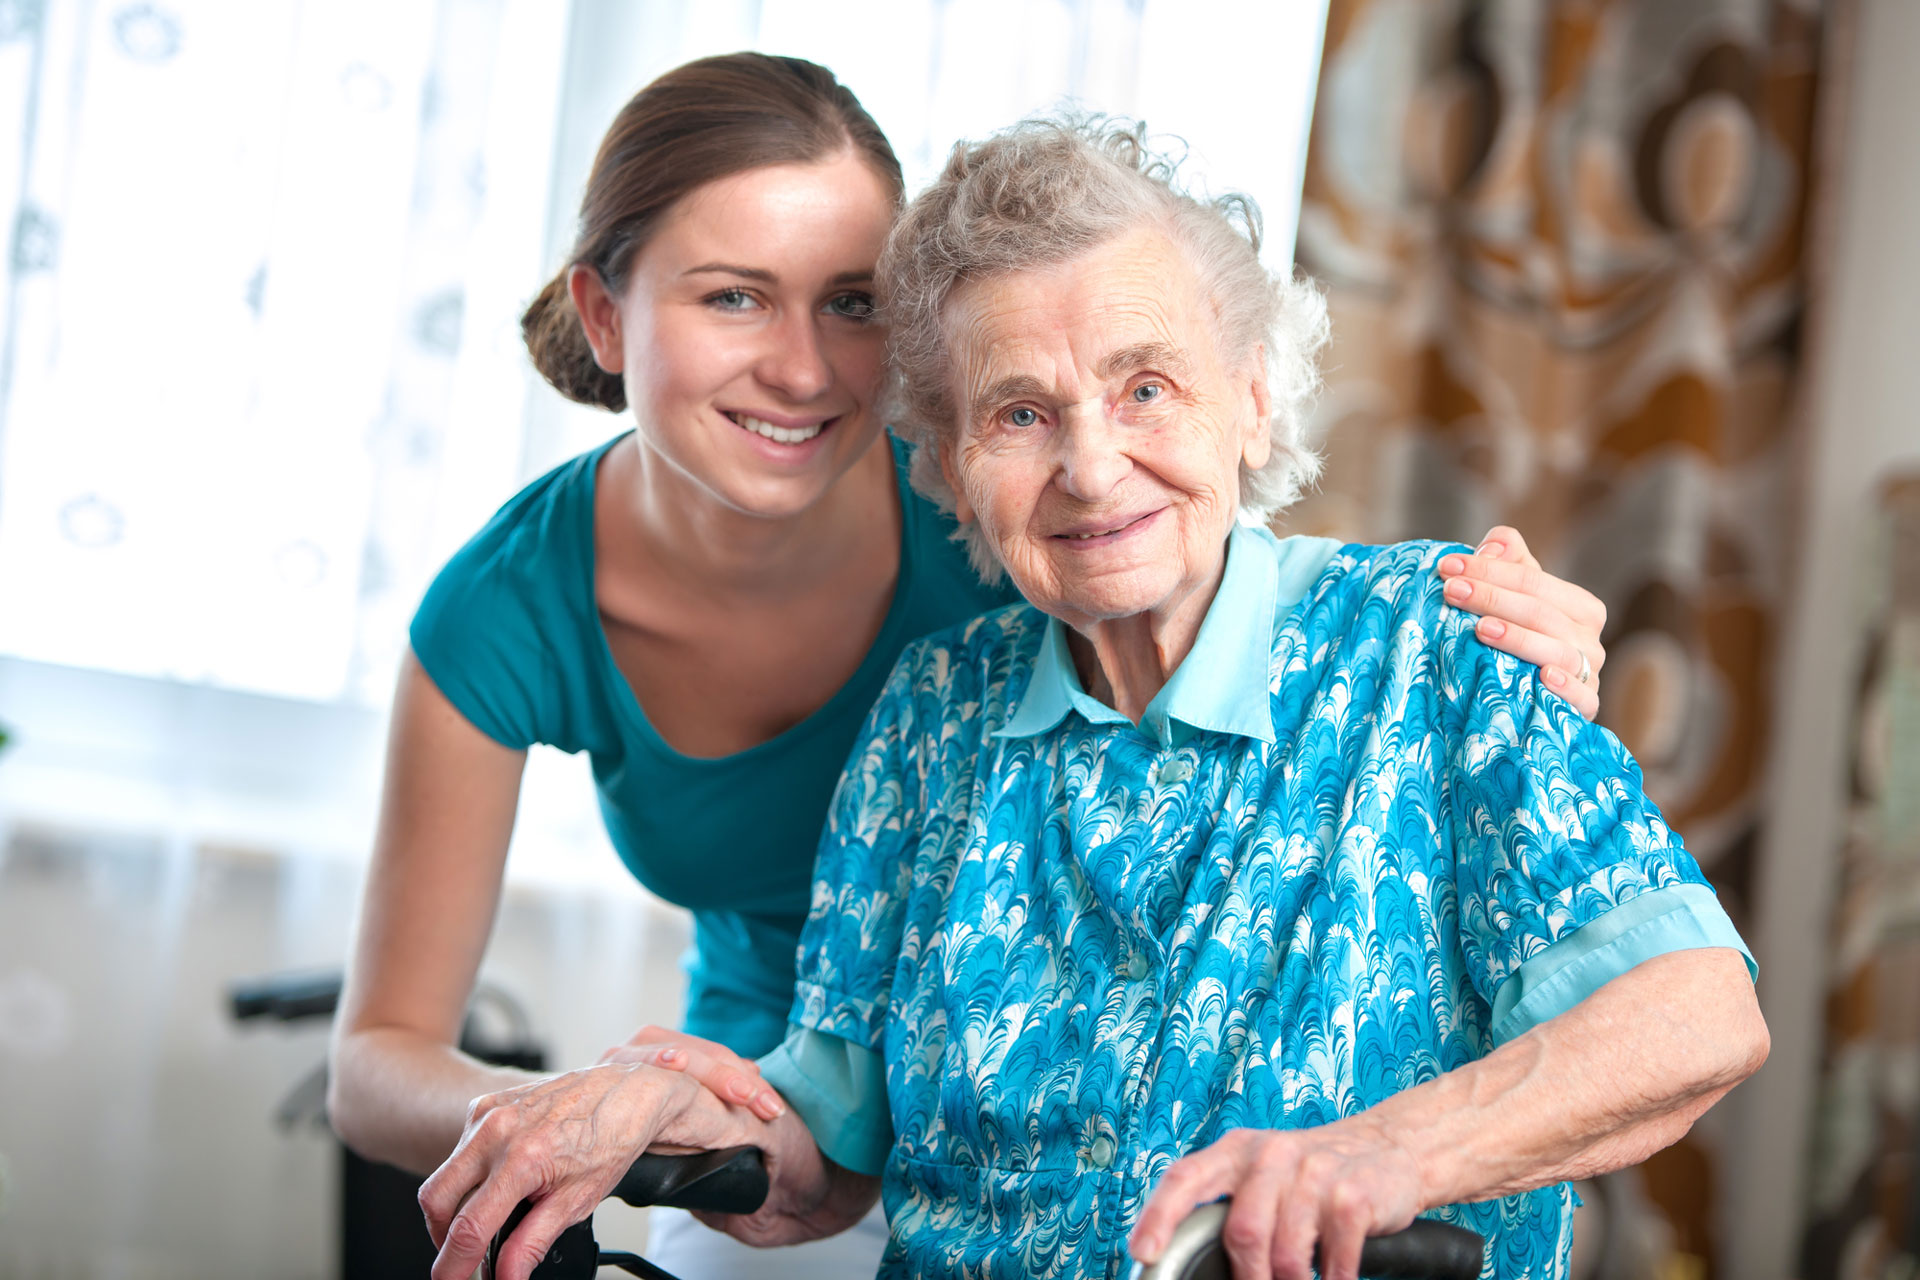 A young woman spending time with her grandmother in dementia care during visiting hours